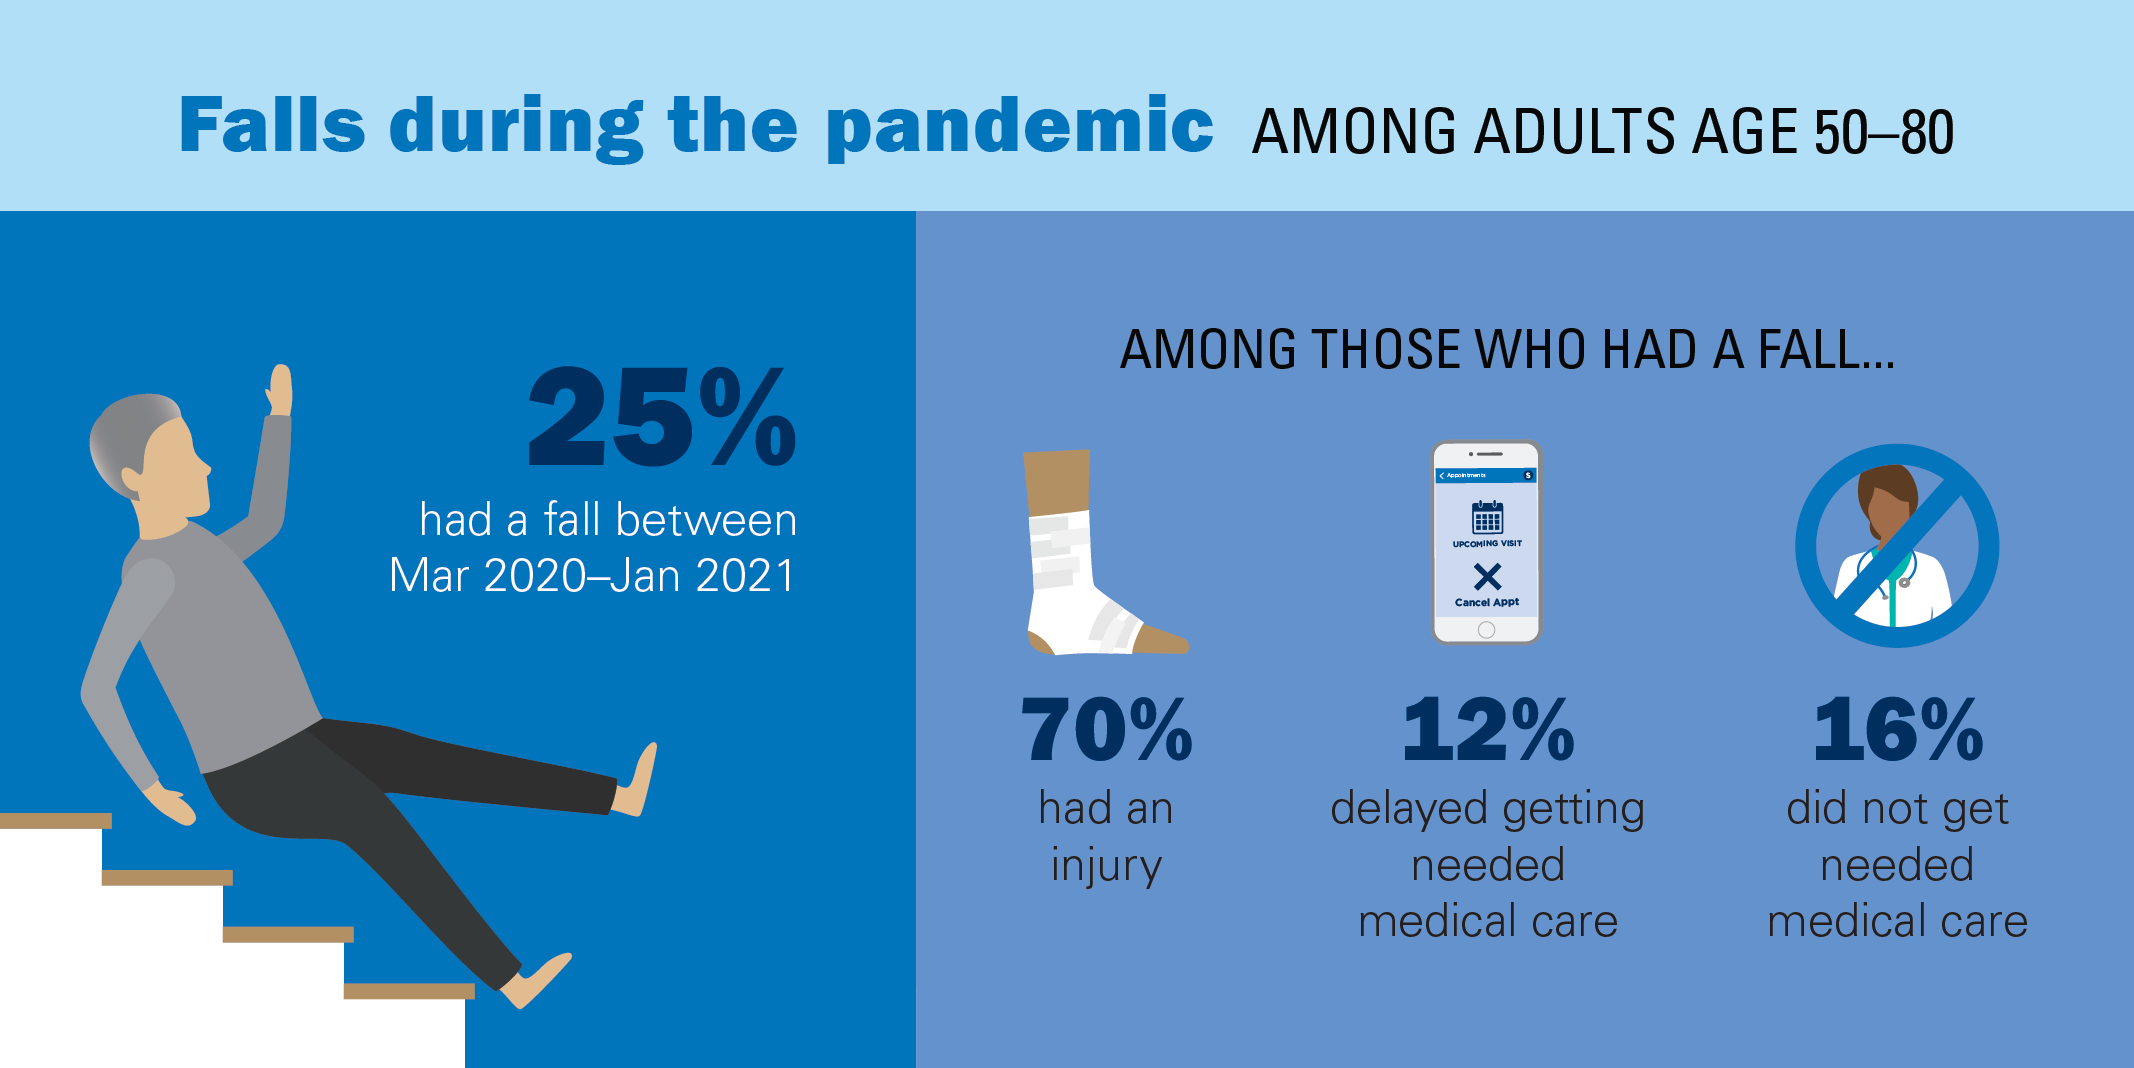 Falls during the pandemic among adults age 50-80